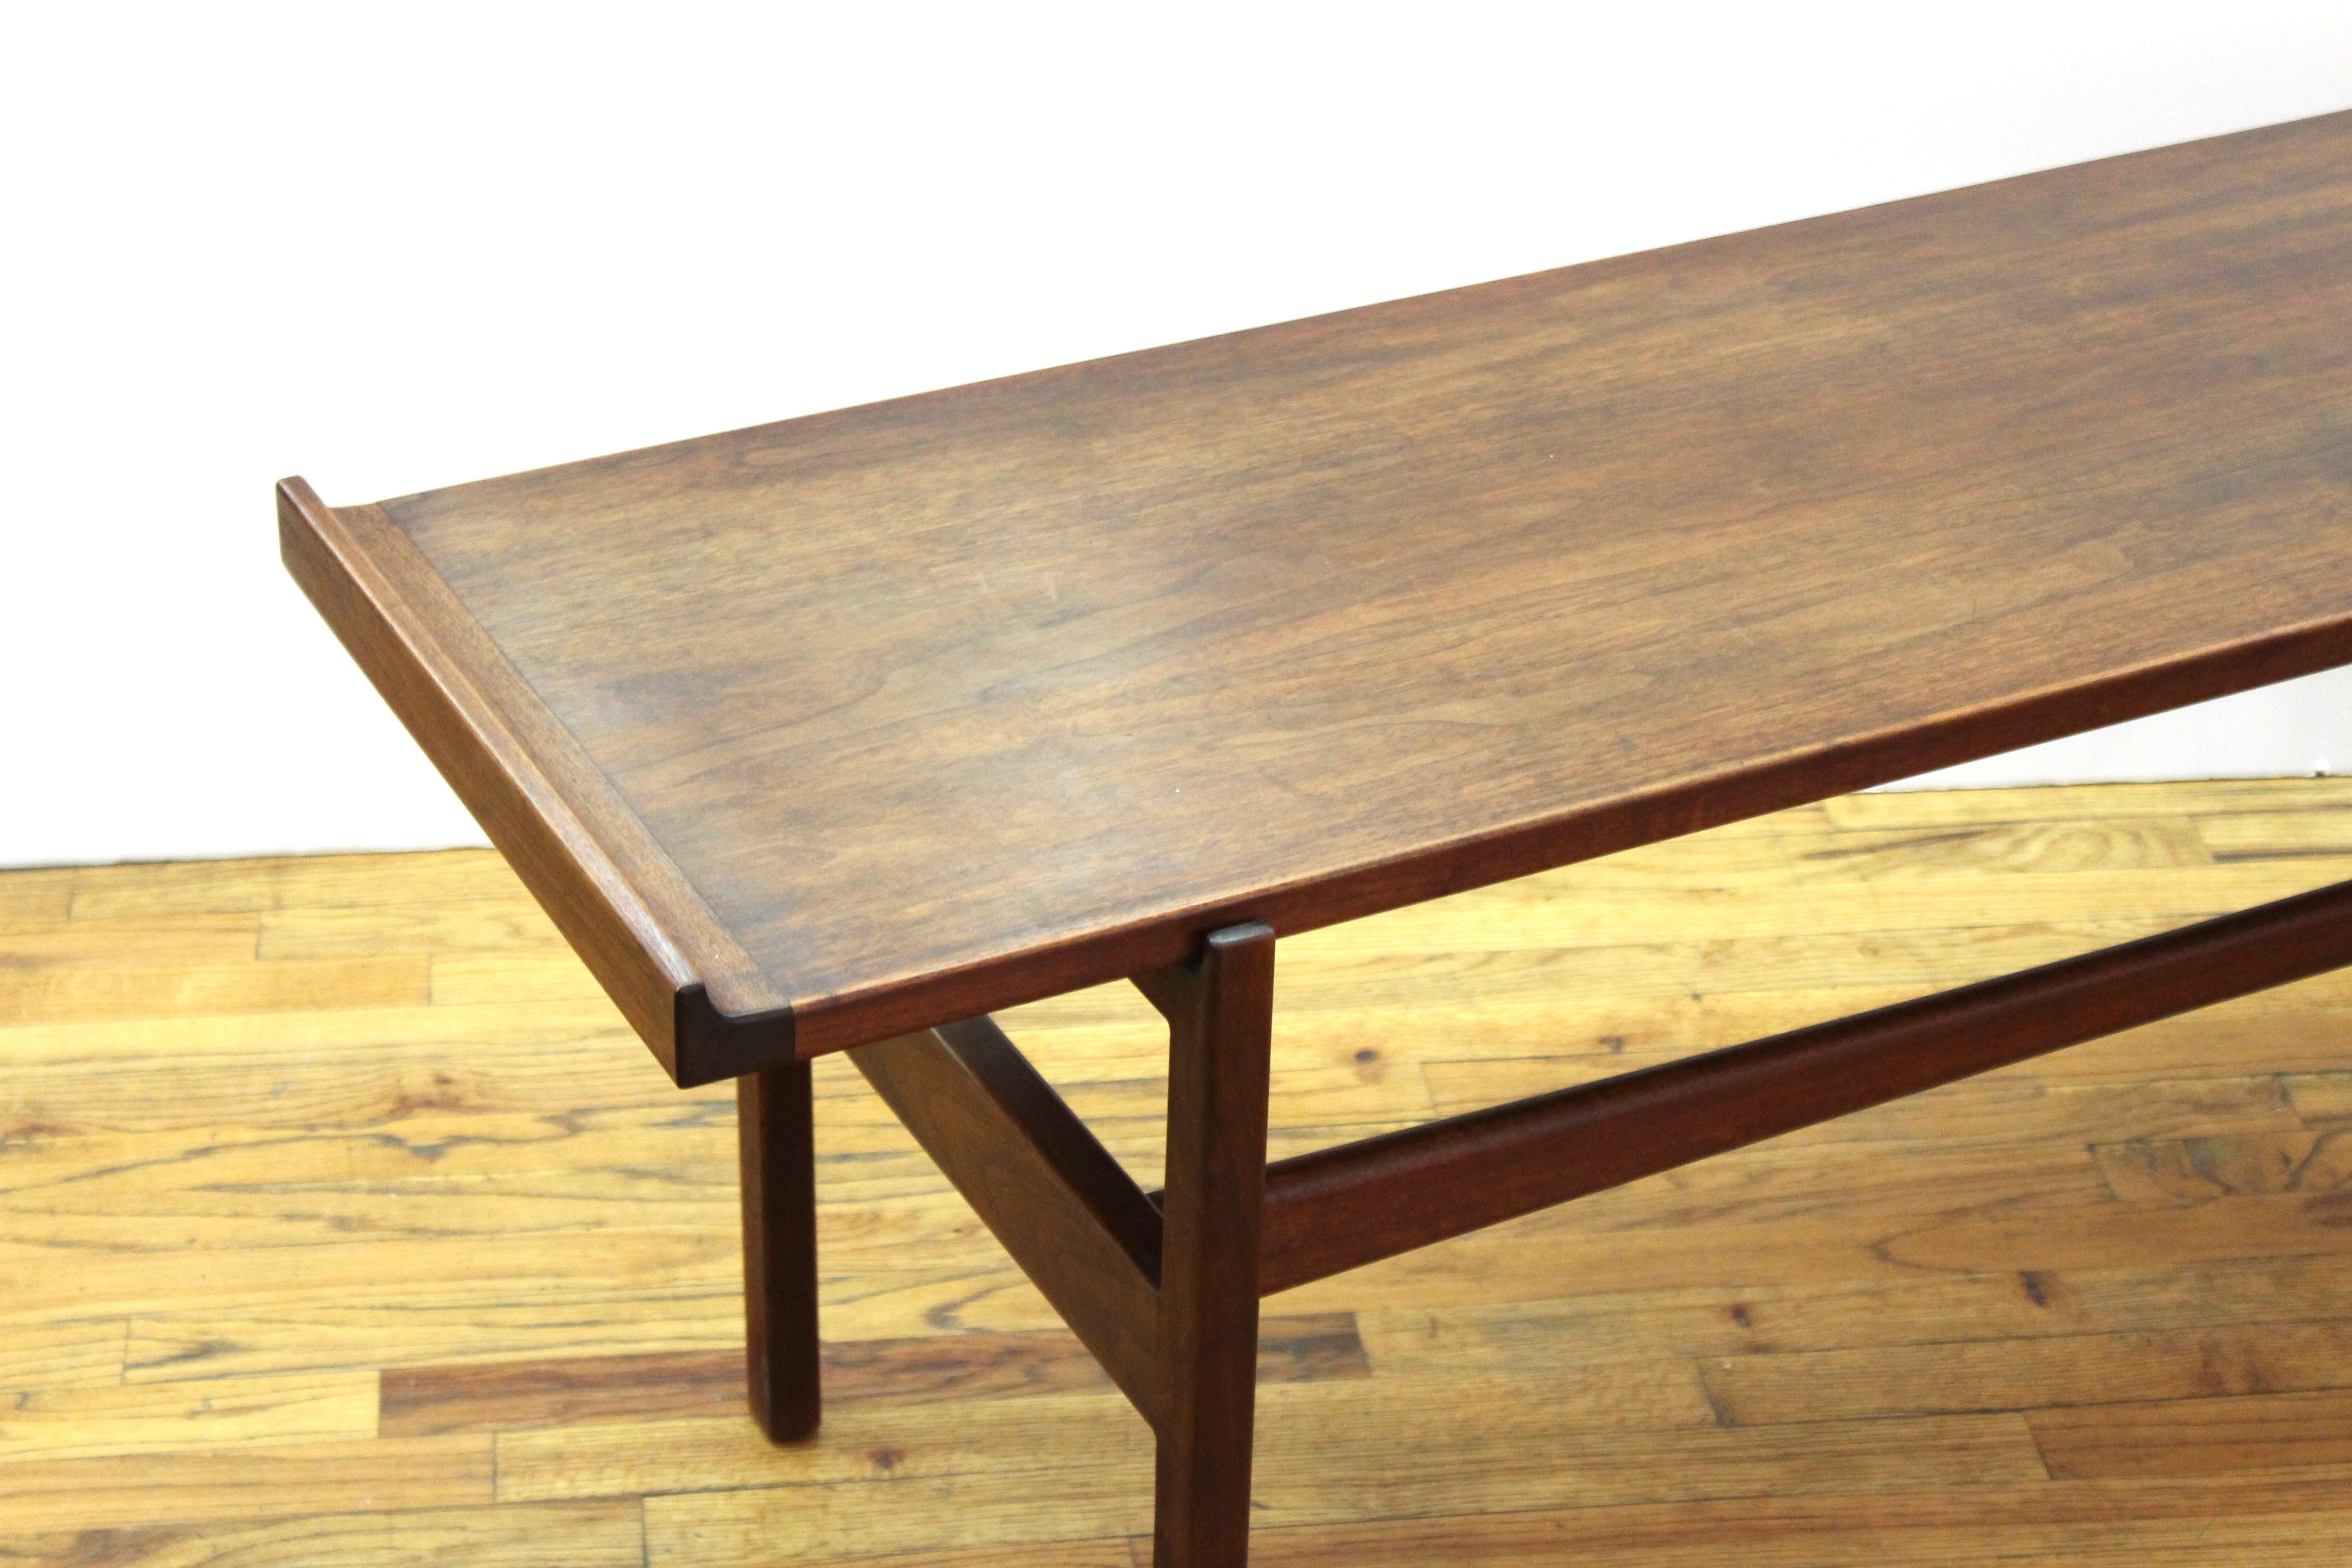 Jens Risom American Mid-Century Modern solid wood coffee table or long bench. The piece has a makers label on the bottom. In great vintage condition with age-appropriate wear and use.